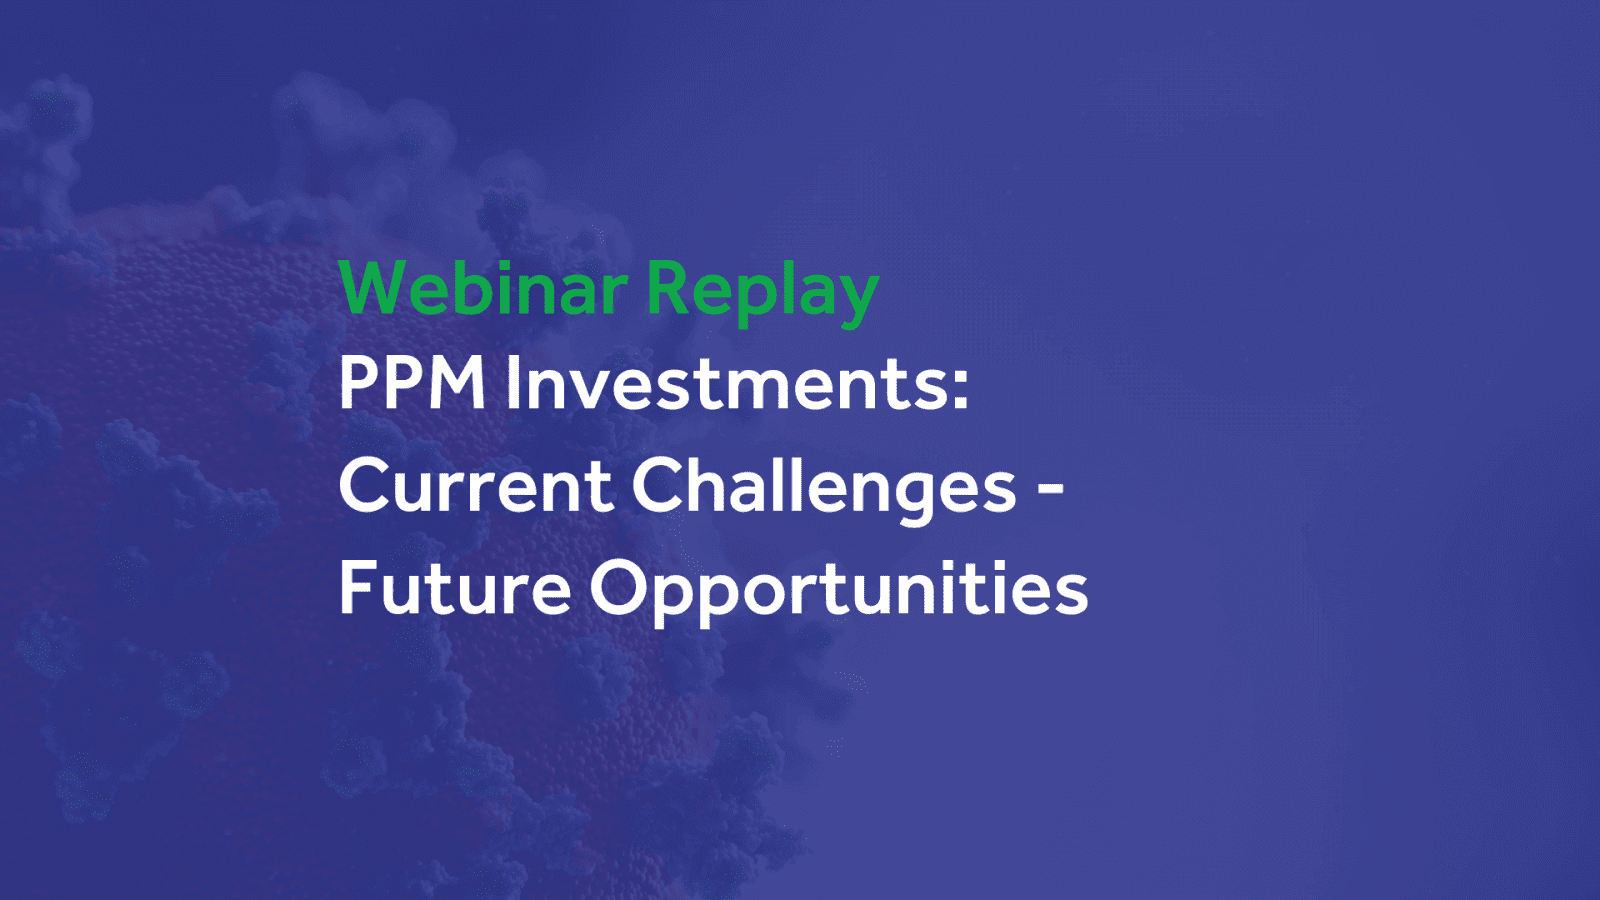 Webinar Replay: PPM Investments